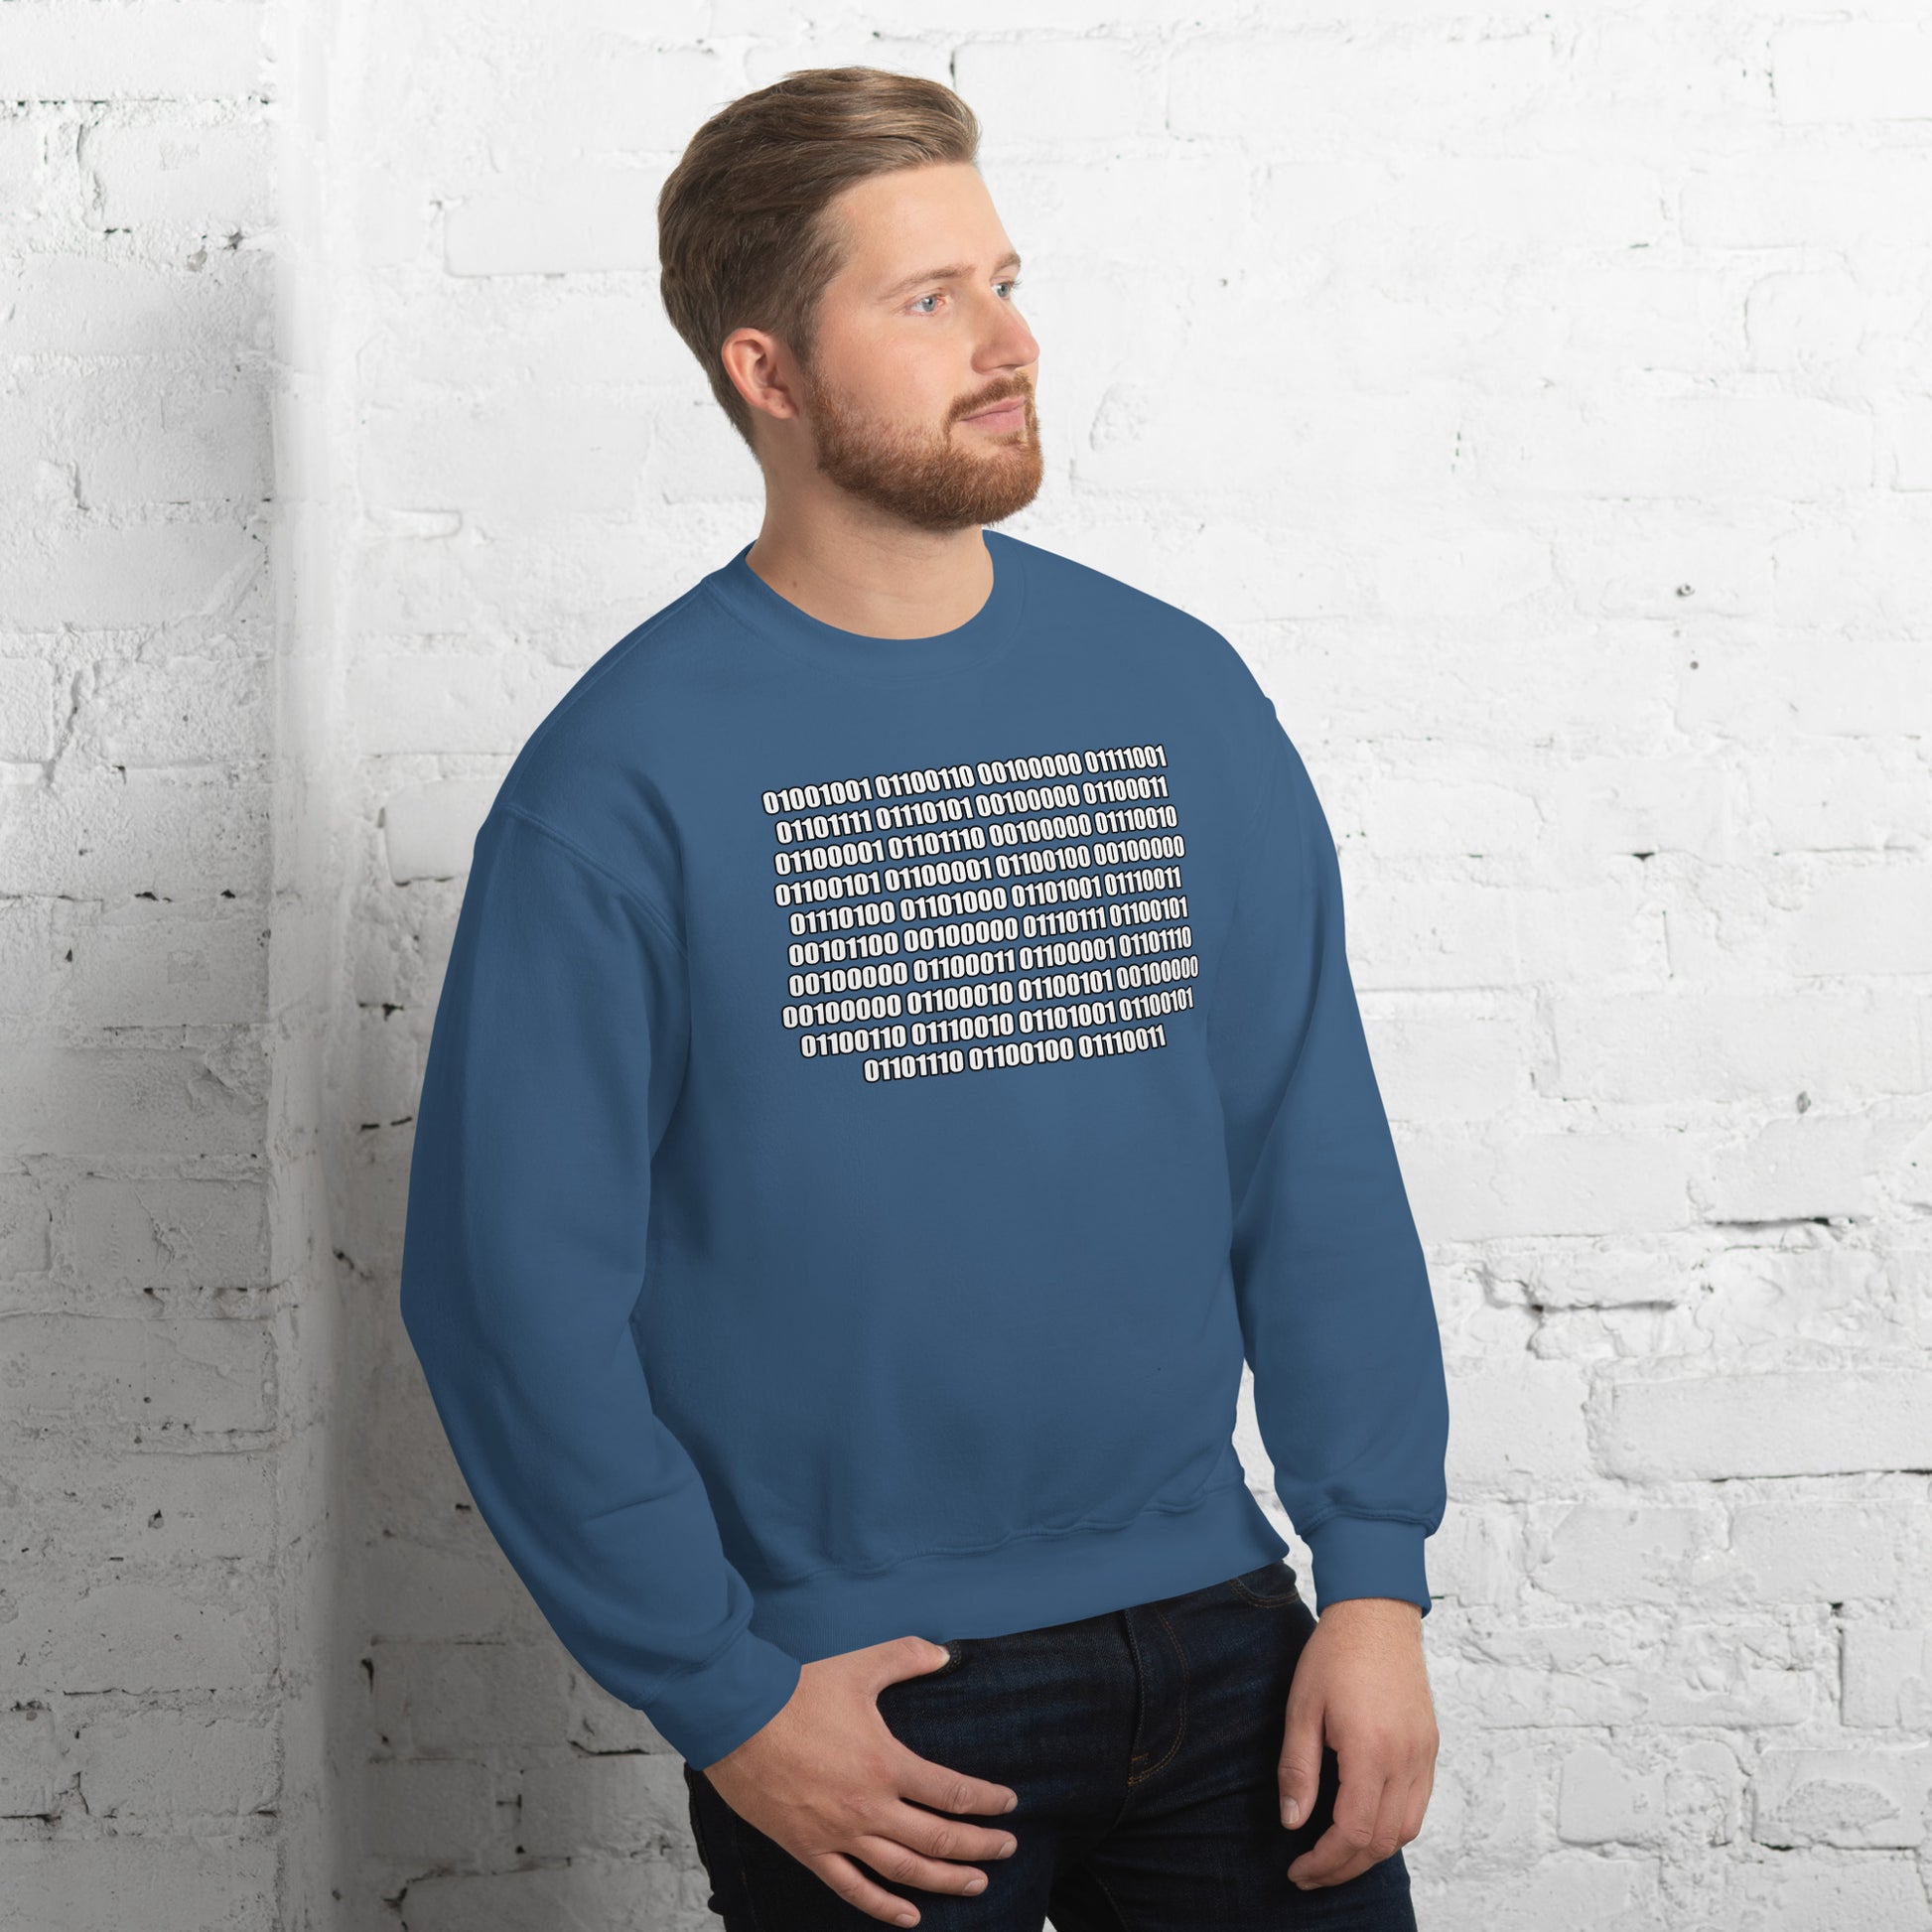 Men with indigo blue sweatshirt with binaire text "If you can read this"